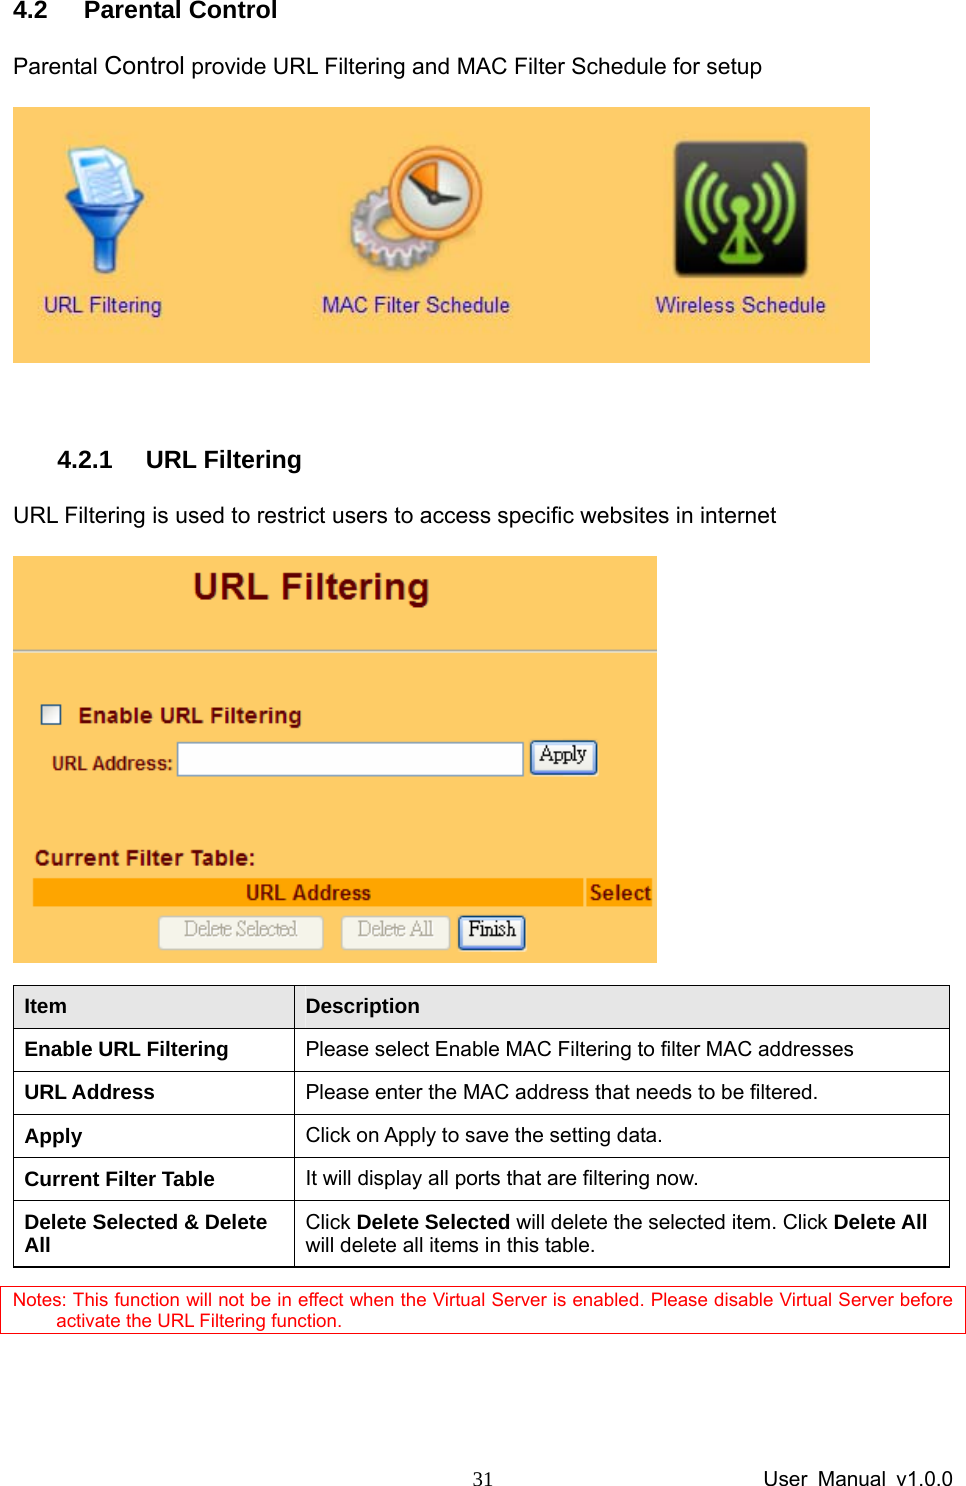                 User Manual v1.0.0 314.2 Parental Control Parental Control provide URL Filtering and MAC Filter Schedule for setup   4.2.1 URL Filtering URL Filtering is used to restrict users to access specific websites in internet  Item  Description Enable URL Filtering  Please select Enable MAC Filtering to filter MAC addresses URL Address  Please enter the MAC address that needs to be filtered. Apply   Click on Apply to save the setting data.   Current Filter Table  It will display all ports that are filtering now. Delete Selected &amp; Delete All  Click Delete Selected will delete the selected item. Click Delete All will delete all items in this table. Notes: This function will not be in effect when the Virtual Server is enabled. Please disable Virtual Server before activate the URL Filtering function.   